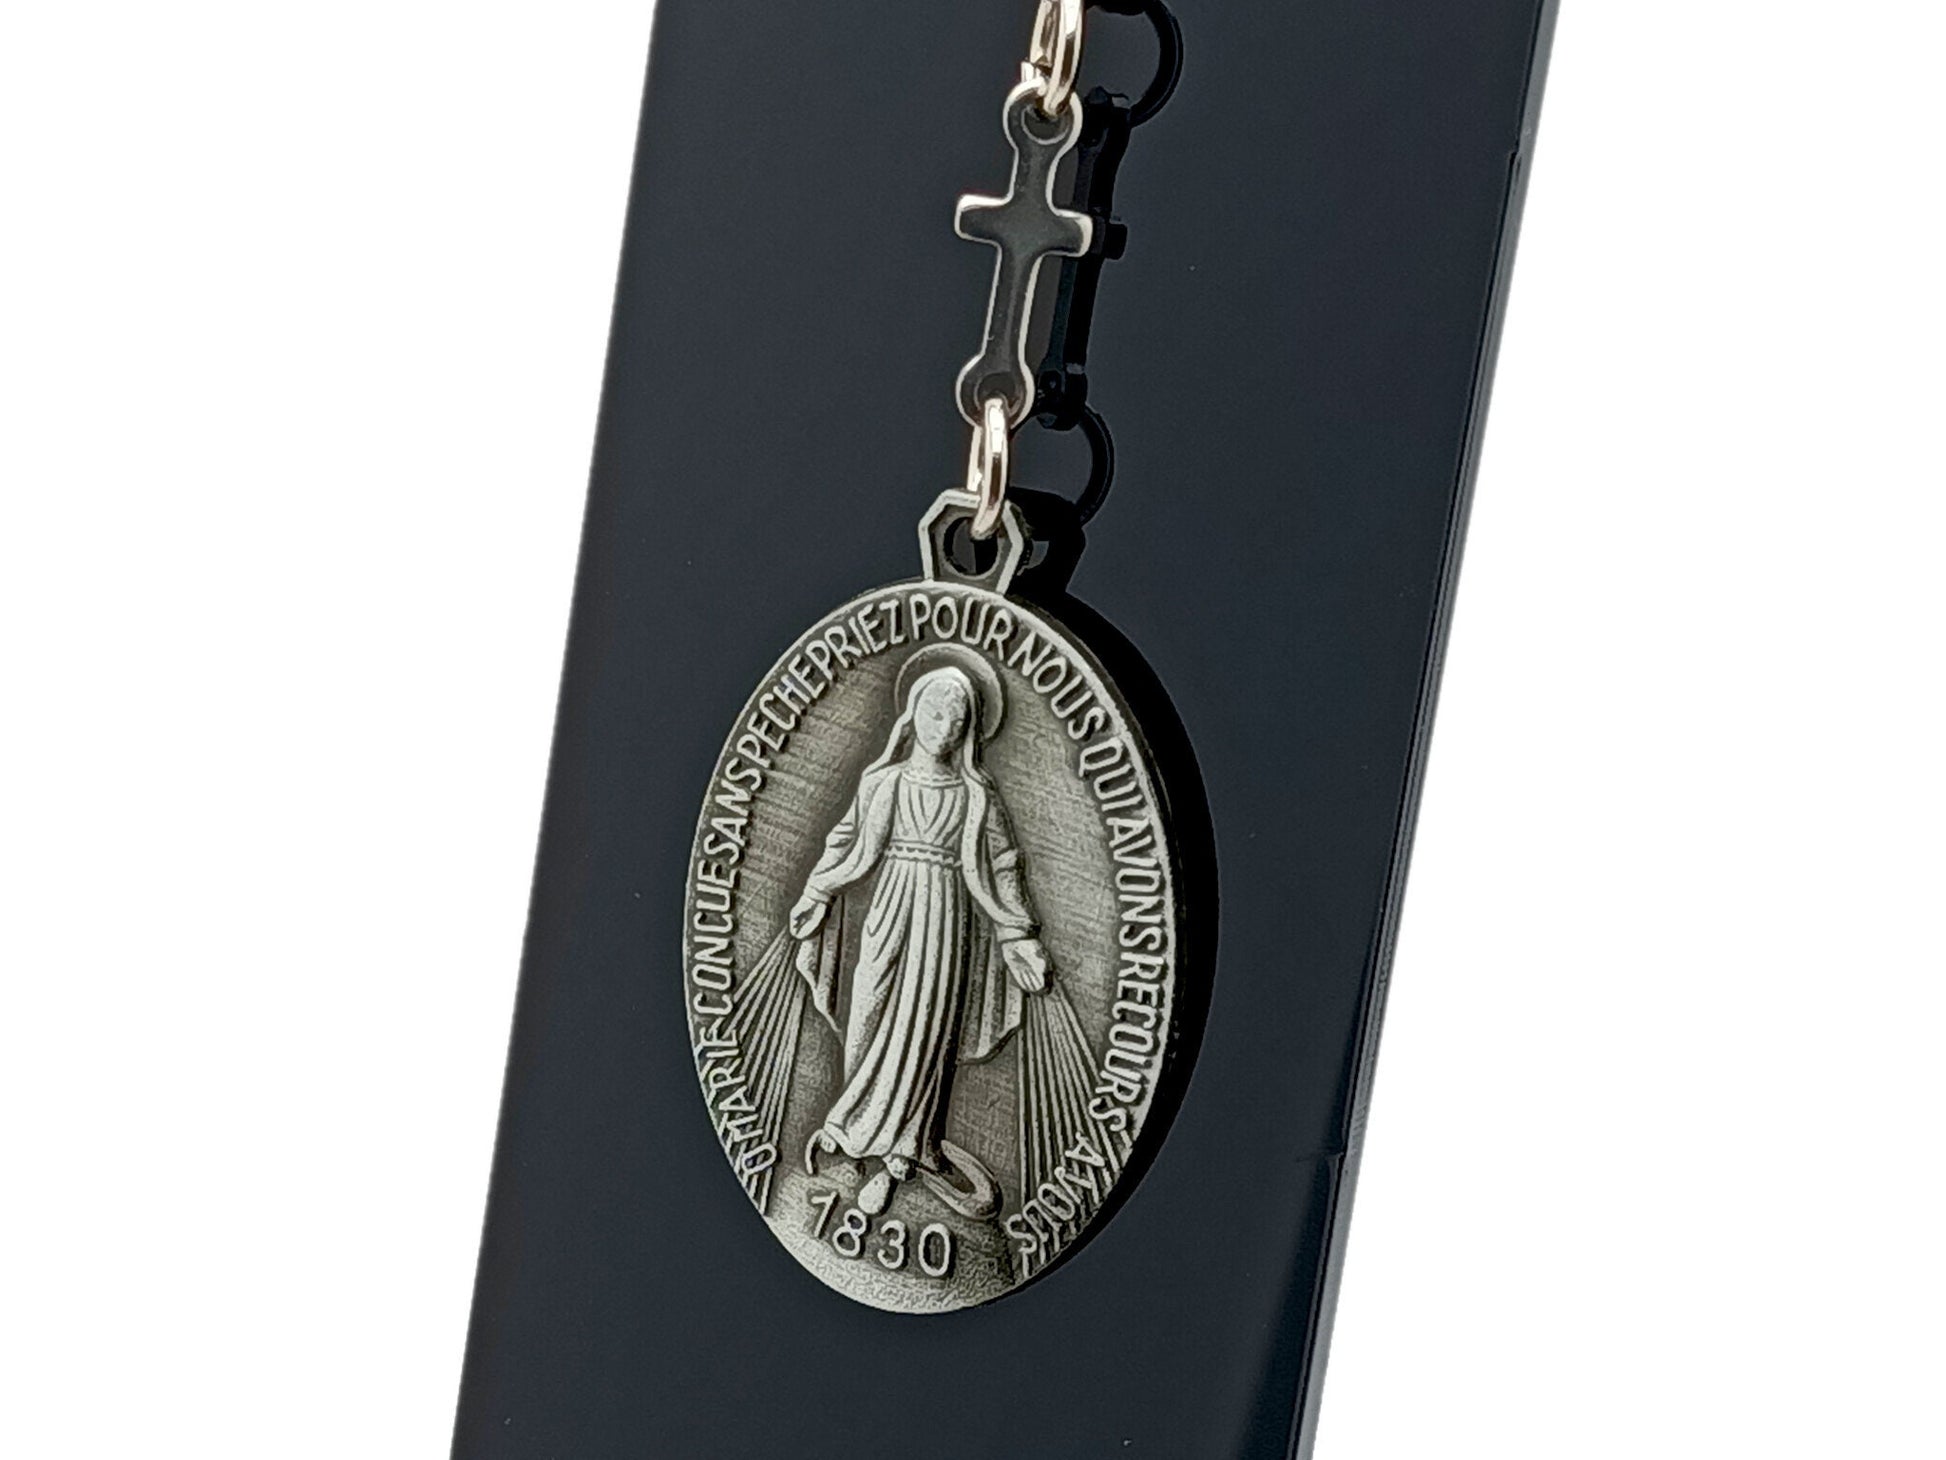 Large Miraculous Medal